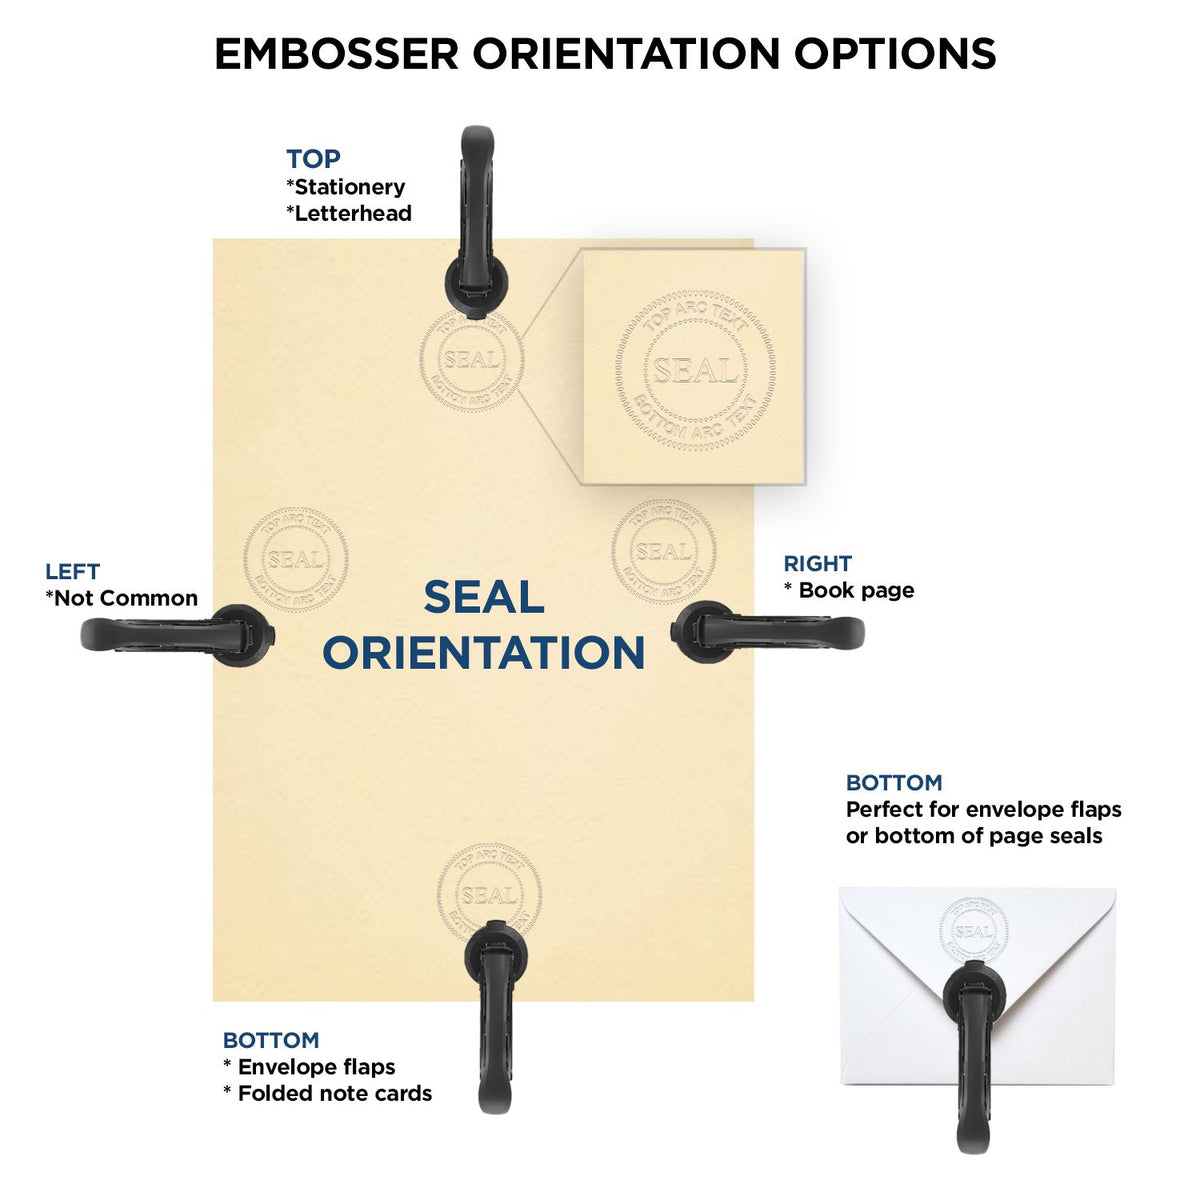 An infographic for the Heavy Duty Cast Iron New Hampshire Geologist Seal Embosser showing embosser orientation, this is showing examples of a top, bottom, right and left insert.